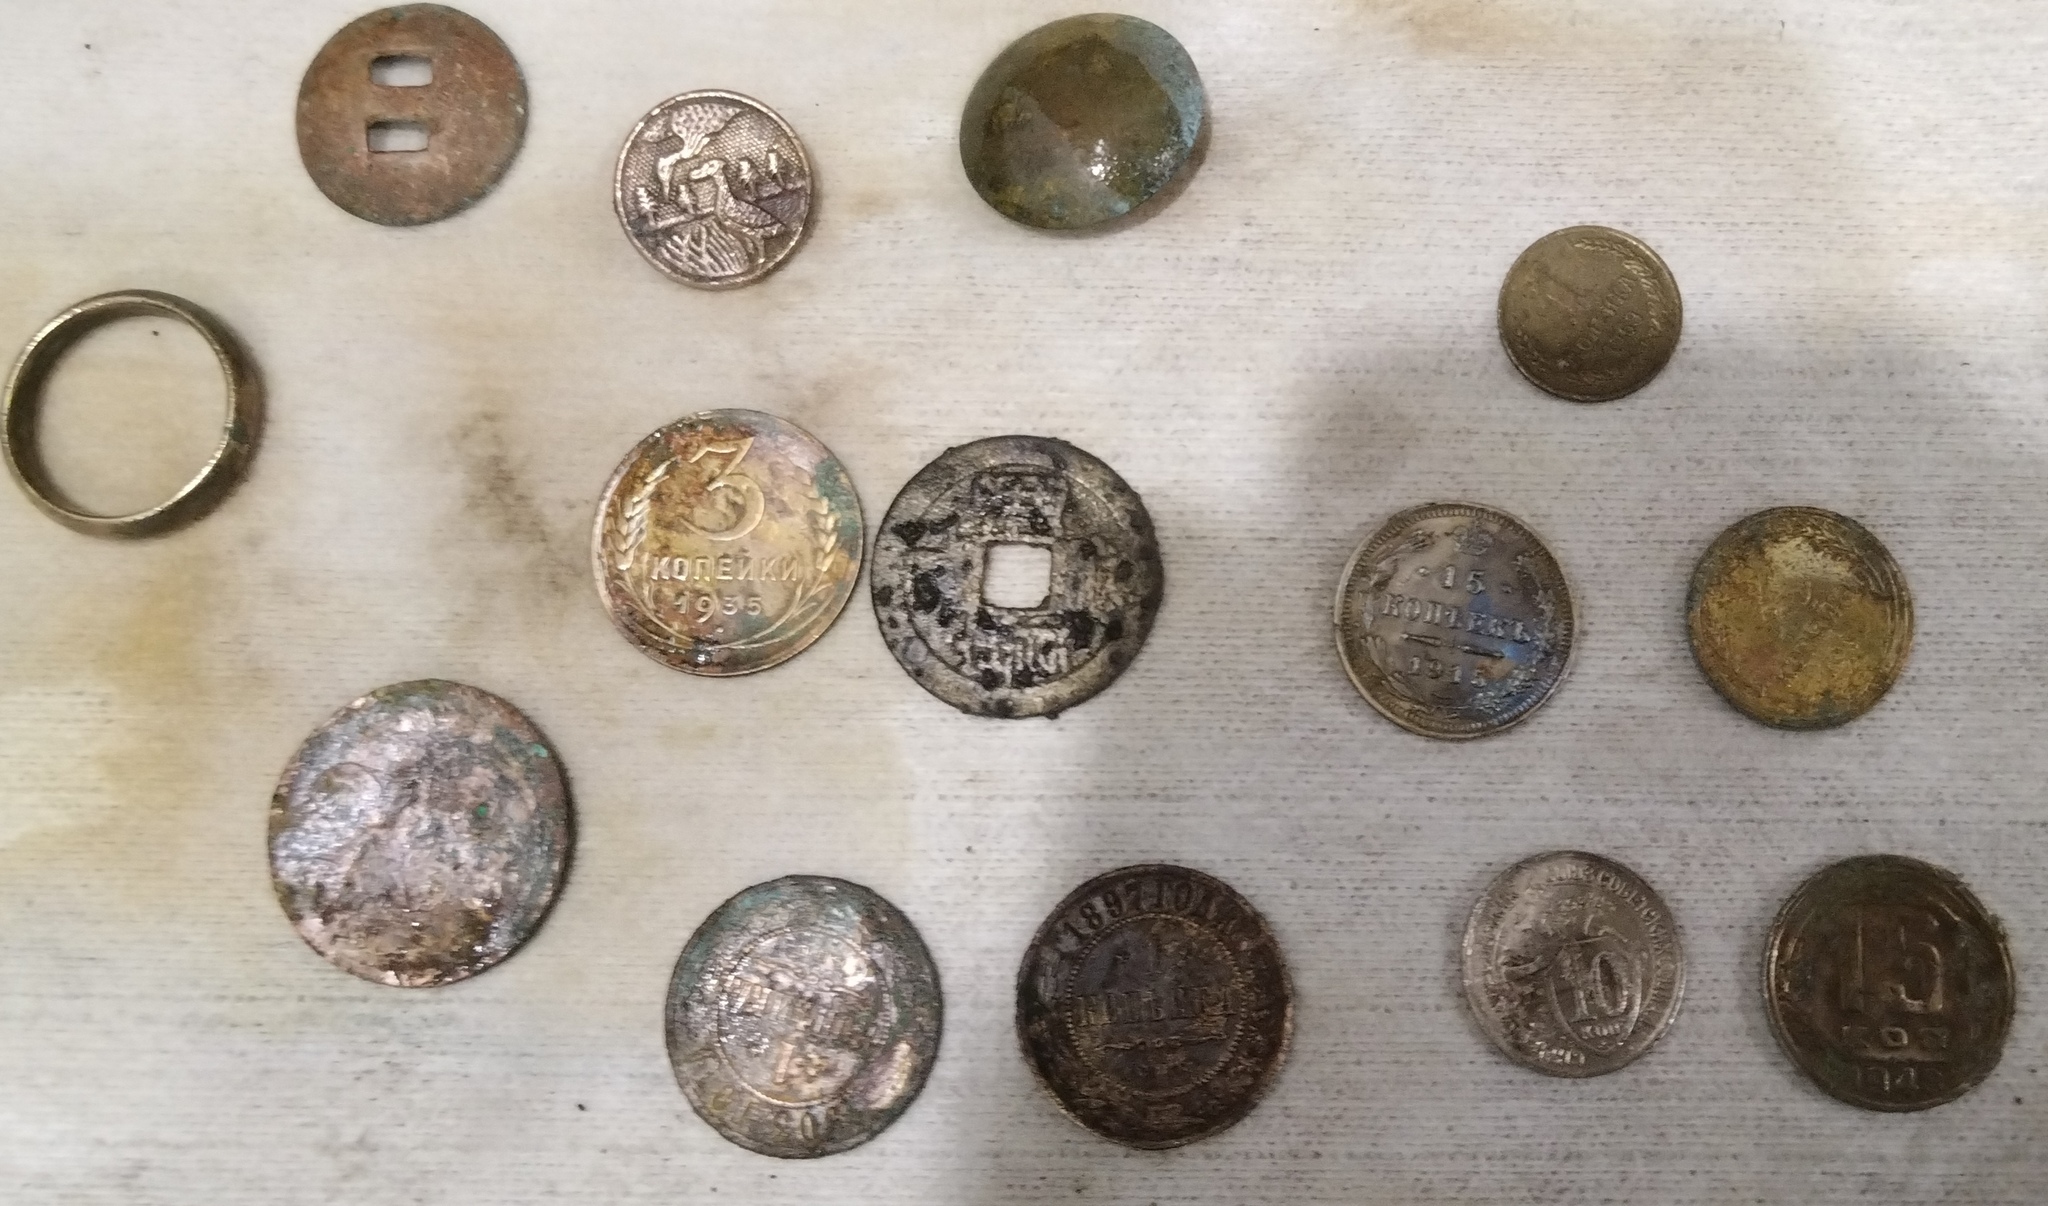 Answers to constant questions - My, Amur region, Blagoveshchensk, Российская империя, Digger, Silver, Find, Archaeological finds, Metal detector, Rare coins, Comrades, Coin, Search, Treasure, Gold, Video, Vertical video, Longpost